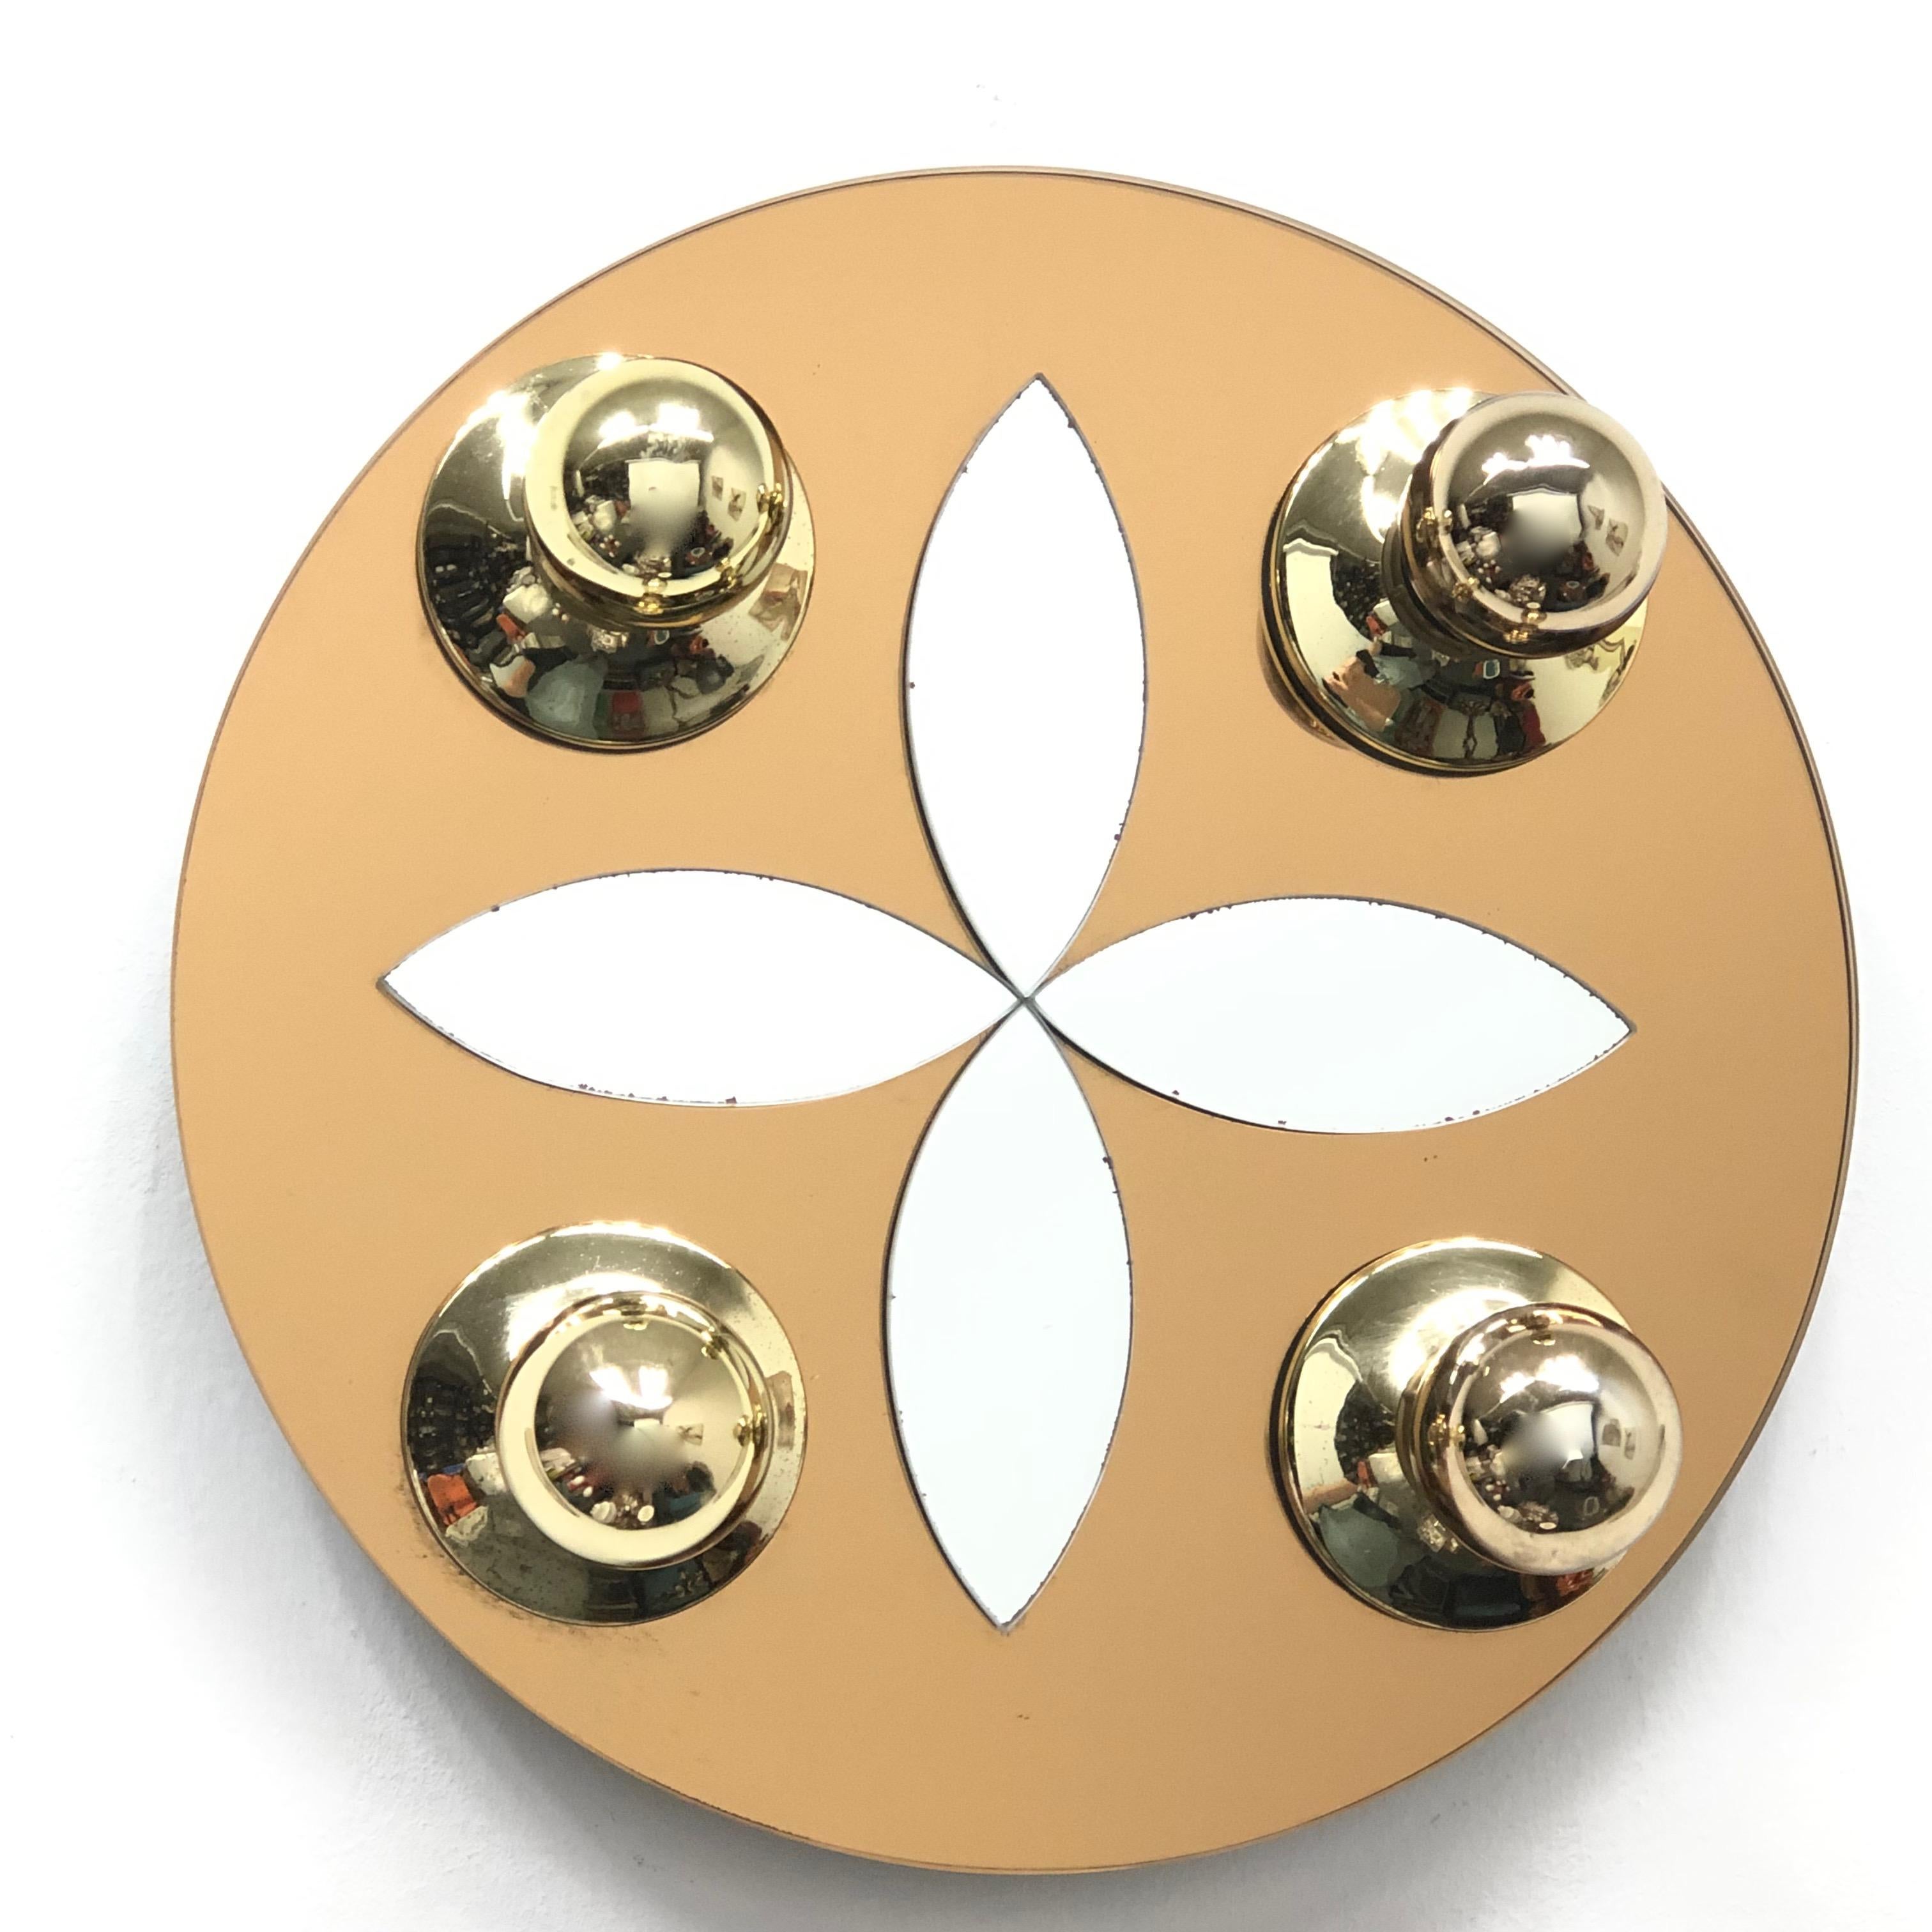 Elegant Austrian modern wall light, with brass base on a mirror and mounted on white lacquered metal. Manufactured by Eglo Leuchten in the 1980s. This fixture requires four European E14 lightbulbs, up to 40 watts each. Lightbulbs pictured are not